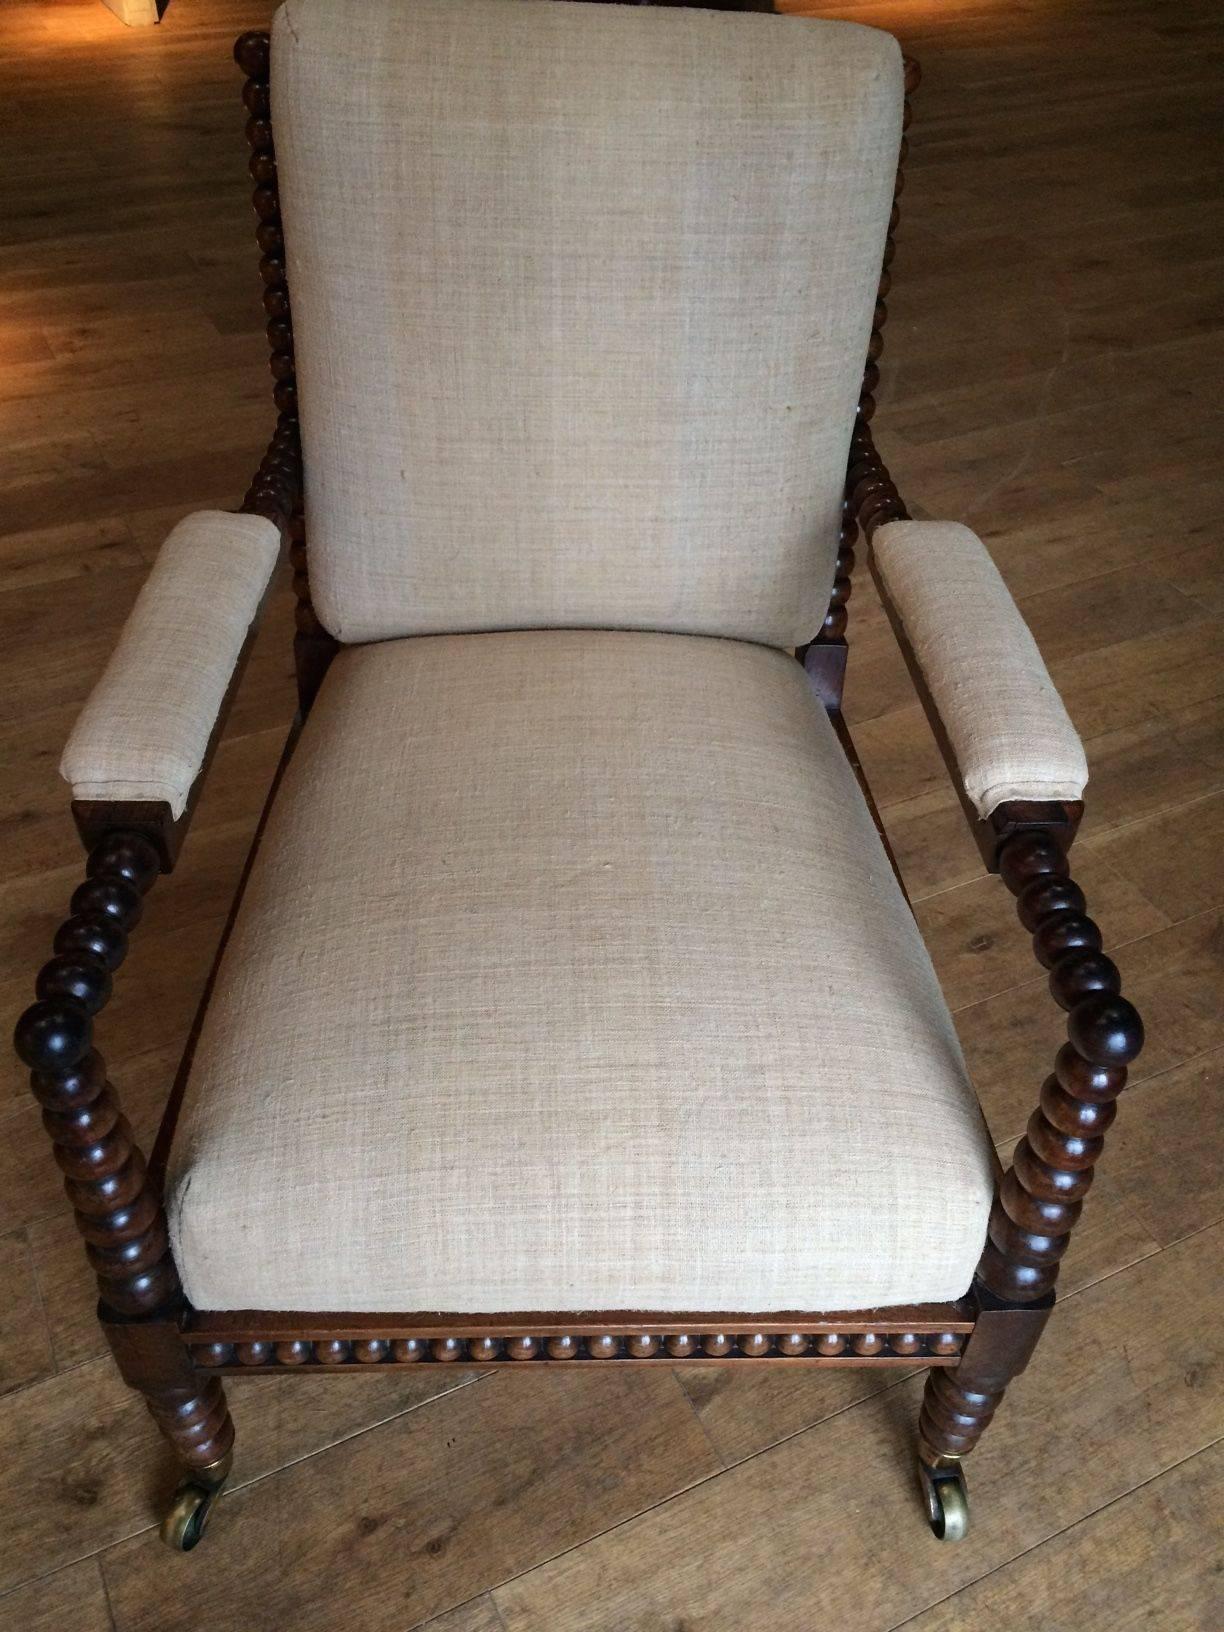 19th century English single upholstered bobbin side/armchair.
The chair has brass casters on wheels and has been recently reupholstered in vintage linen.
It is in excellent condition.

 